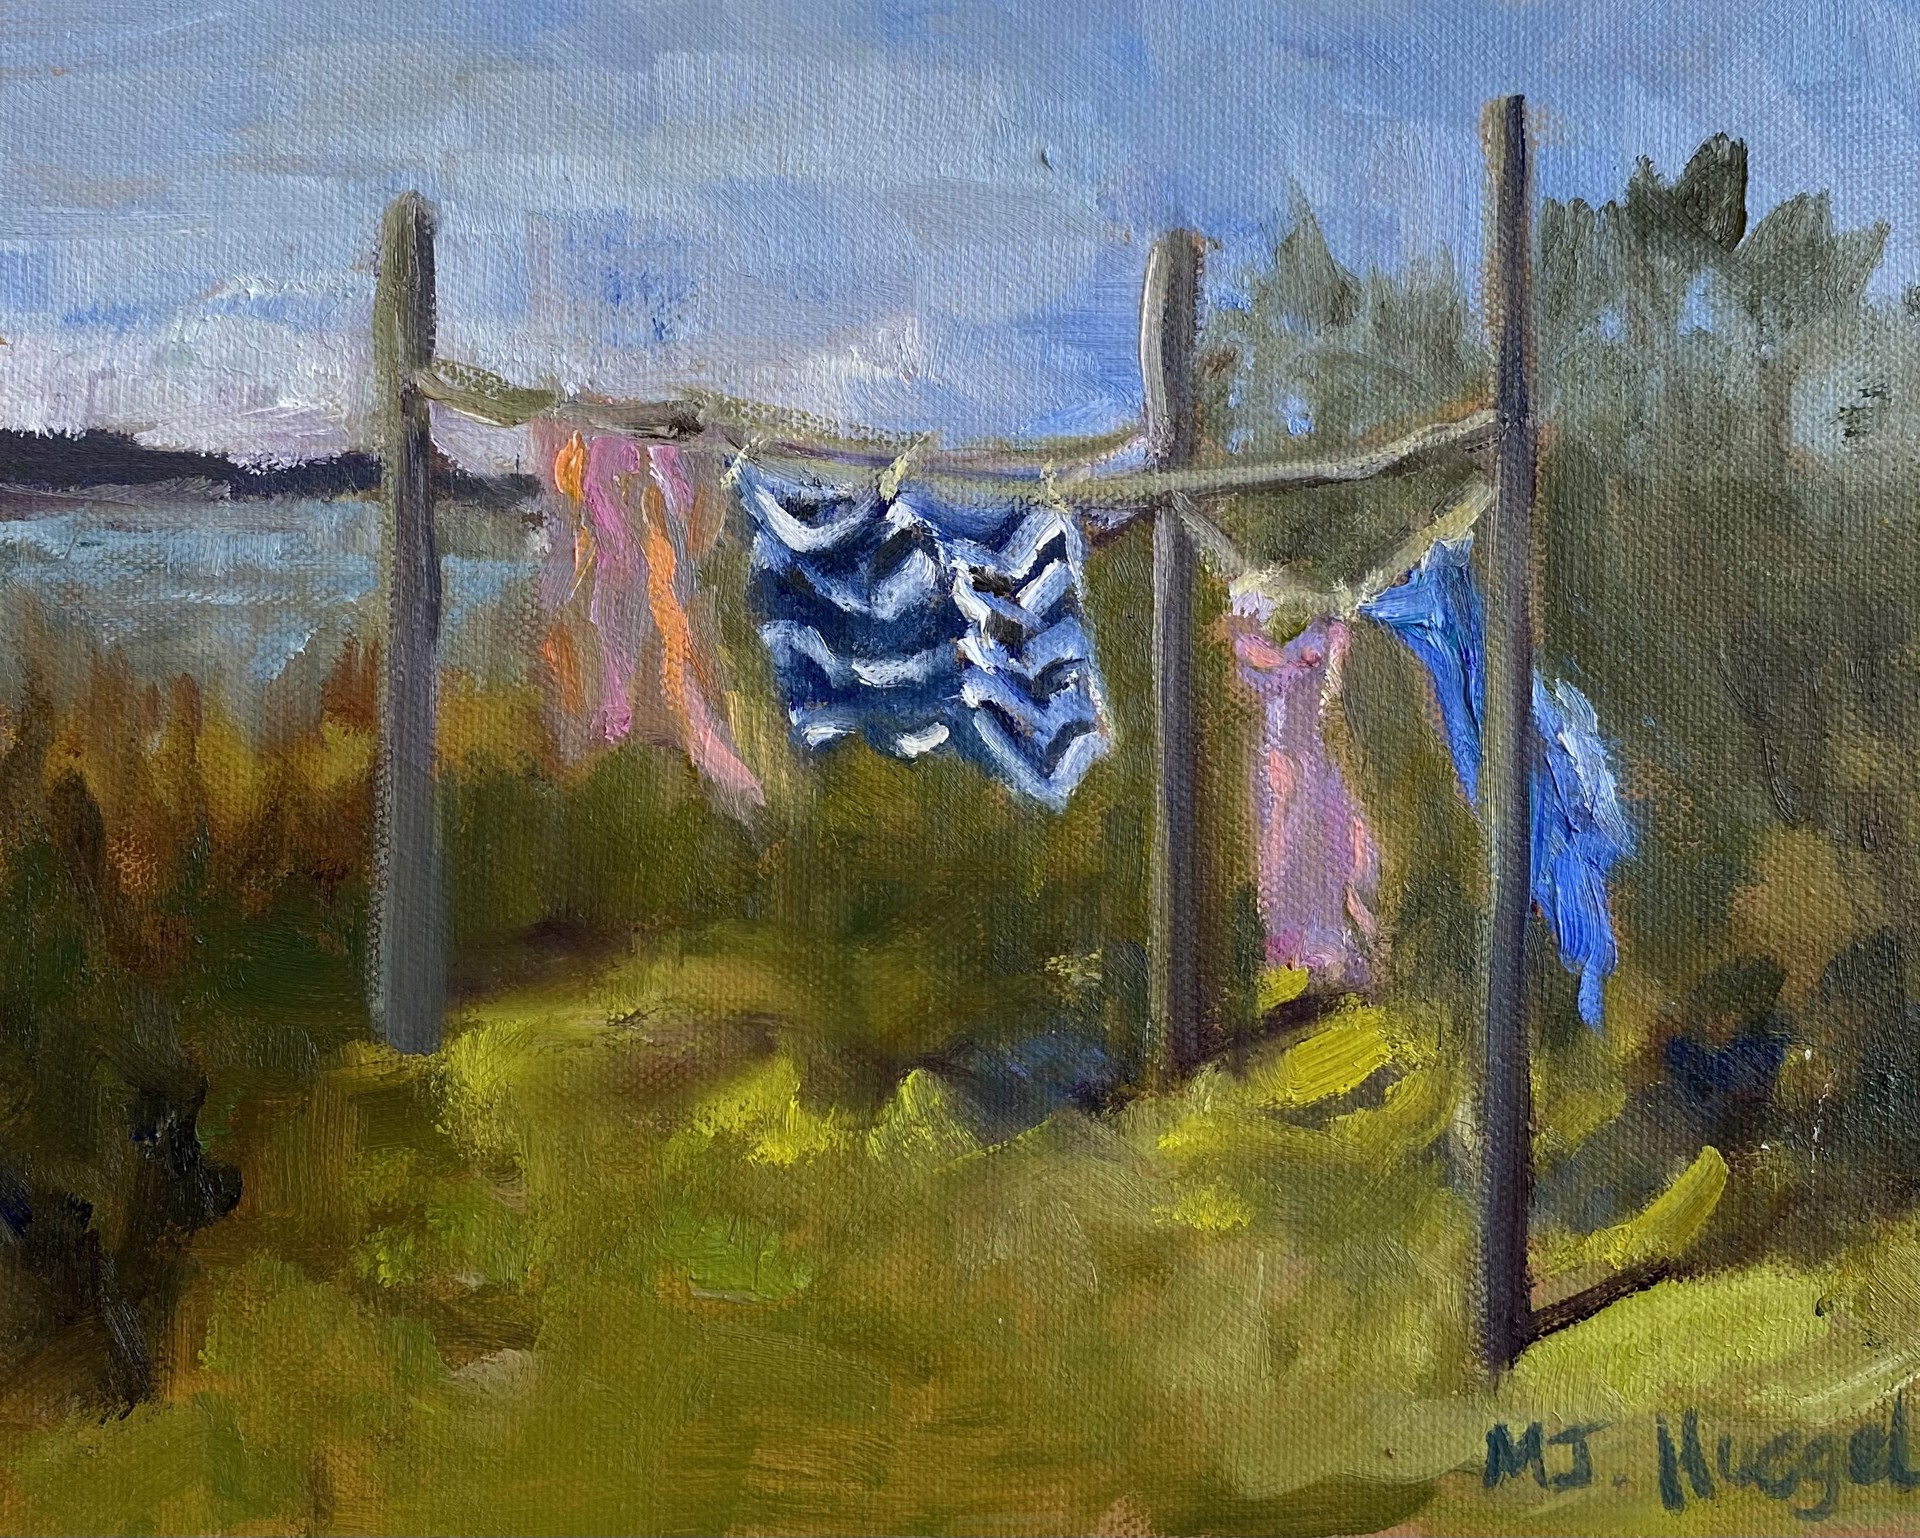 Hung Up To Dry by Mary Jane Huegel